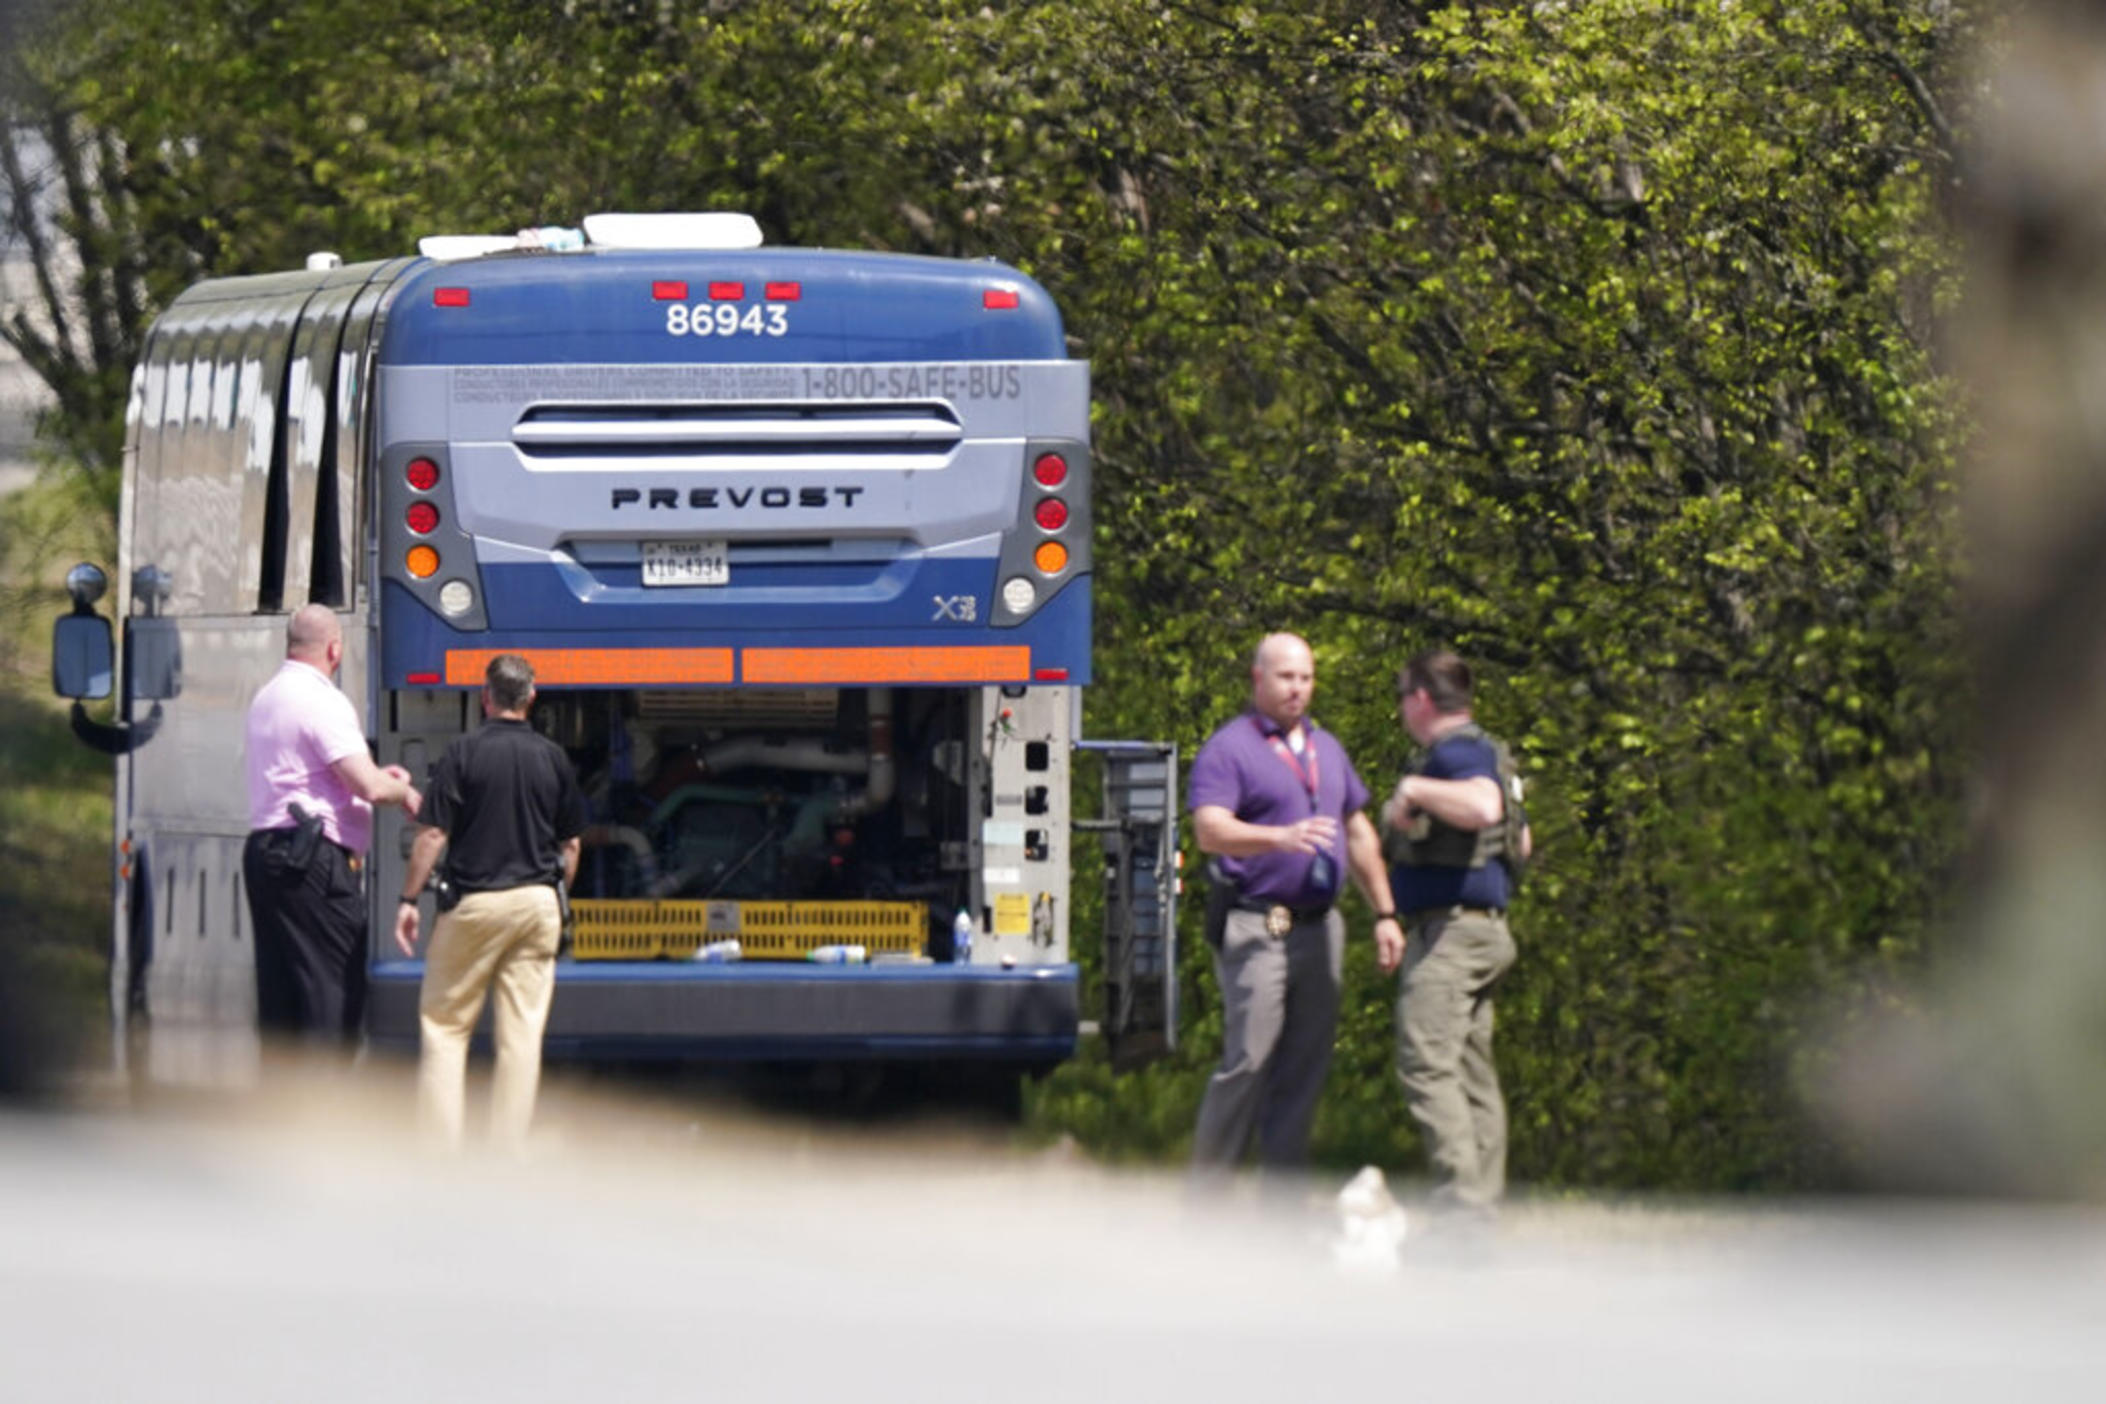 Authorities work the scene of a standoff with a person who is armed with a gun aboard a Greyhound bus on Tuesday, March 22, 2022, in Norcross, Ga. The police tactics team has surrounded the bus along a major interstate northeast of Atlanta, prompting the highway to close in both directions for more than four hours.